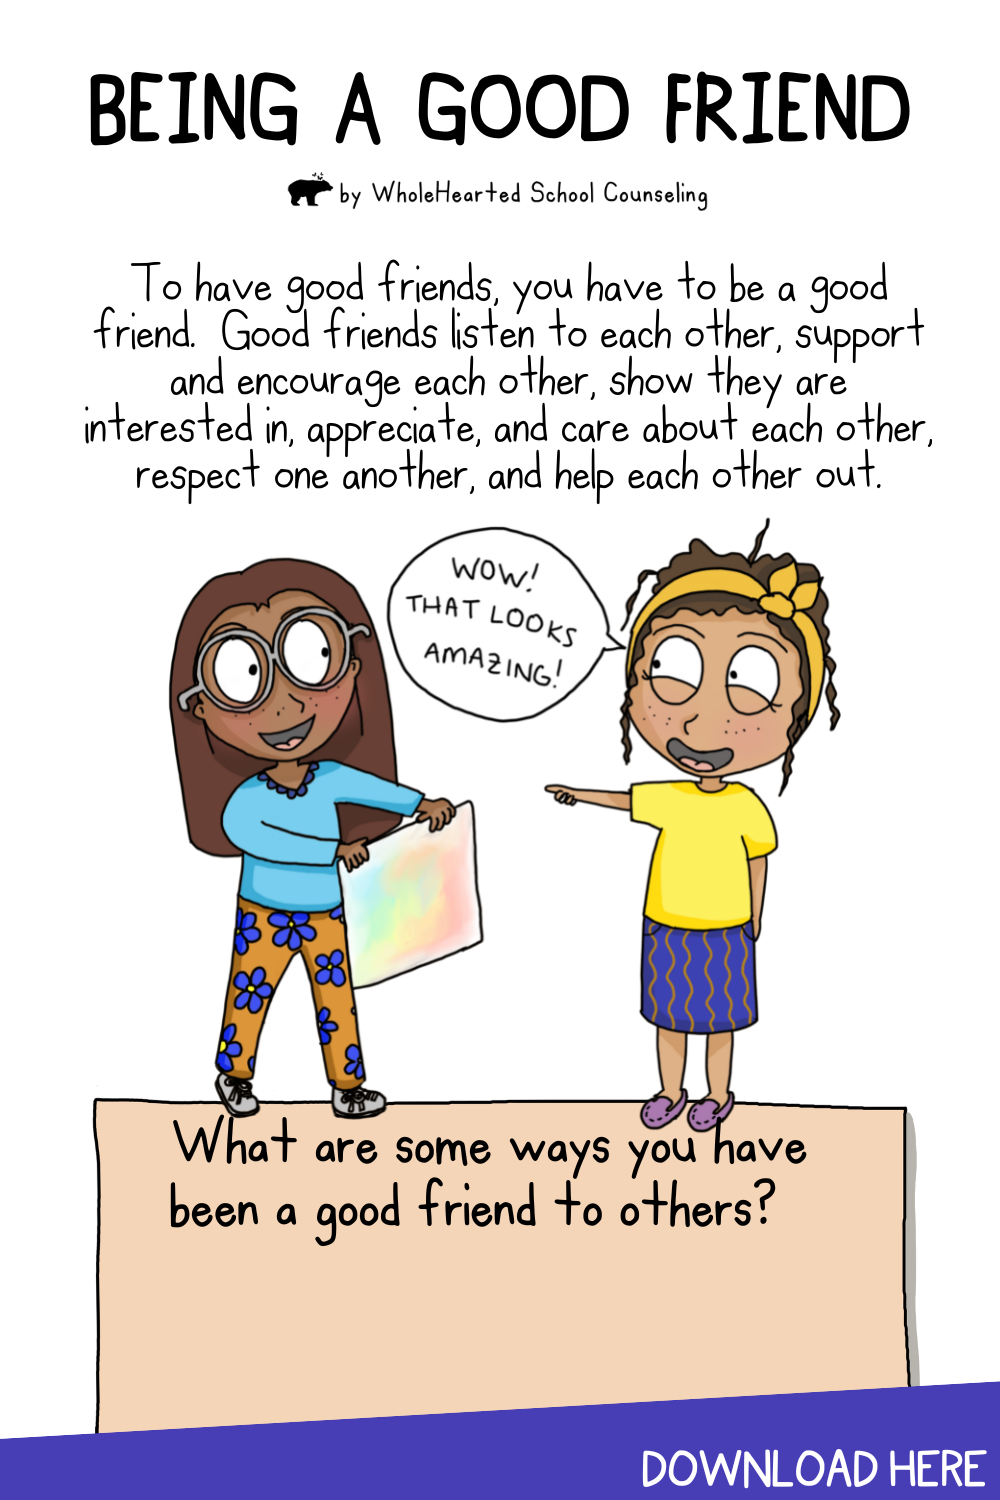 sel journal on how to be a good friend and friendship tips.